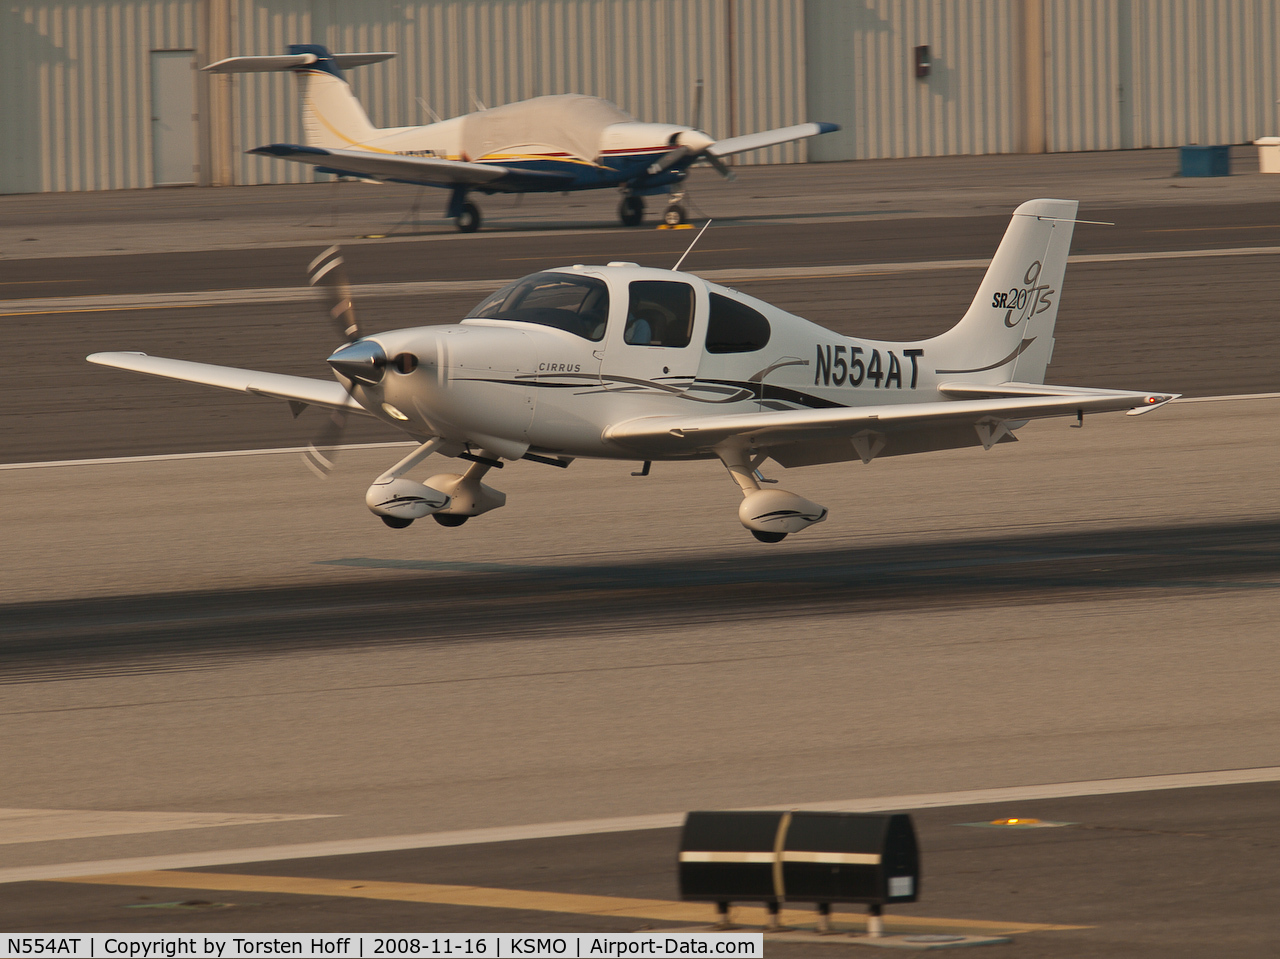 N554AT, 2006 Cirrus SR20 C/N 1678, N554AT arriving on RWY 21. Note that the pilot's door isn't fully closed.